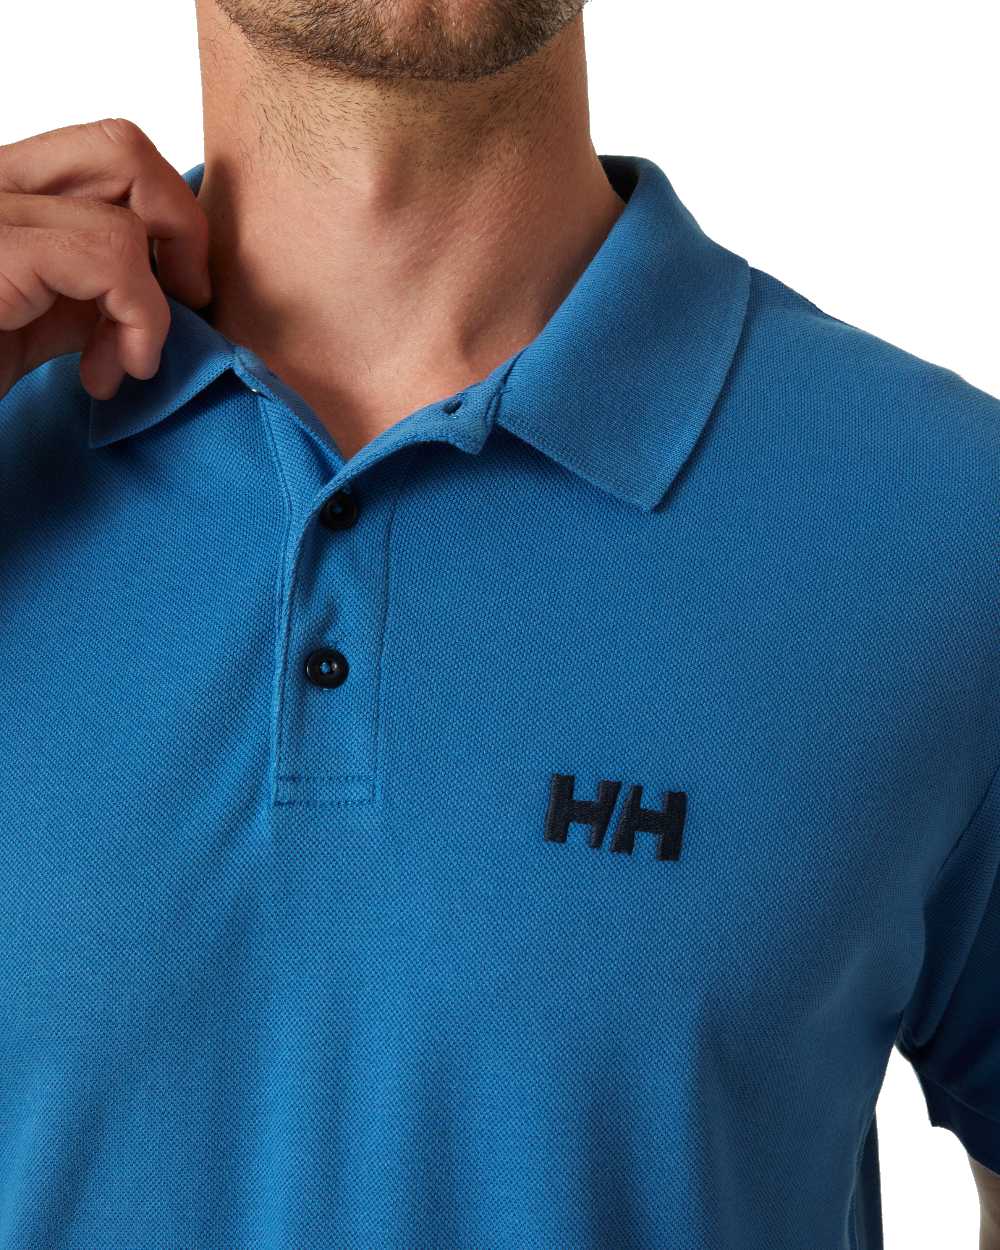 Azurite coloured Helly Hansen Mens Malcesine Polo T-Shirt on white background 